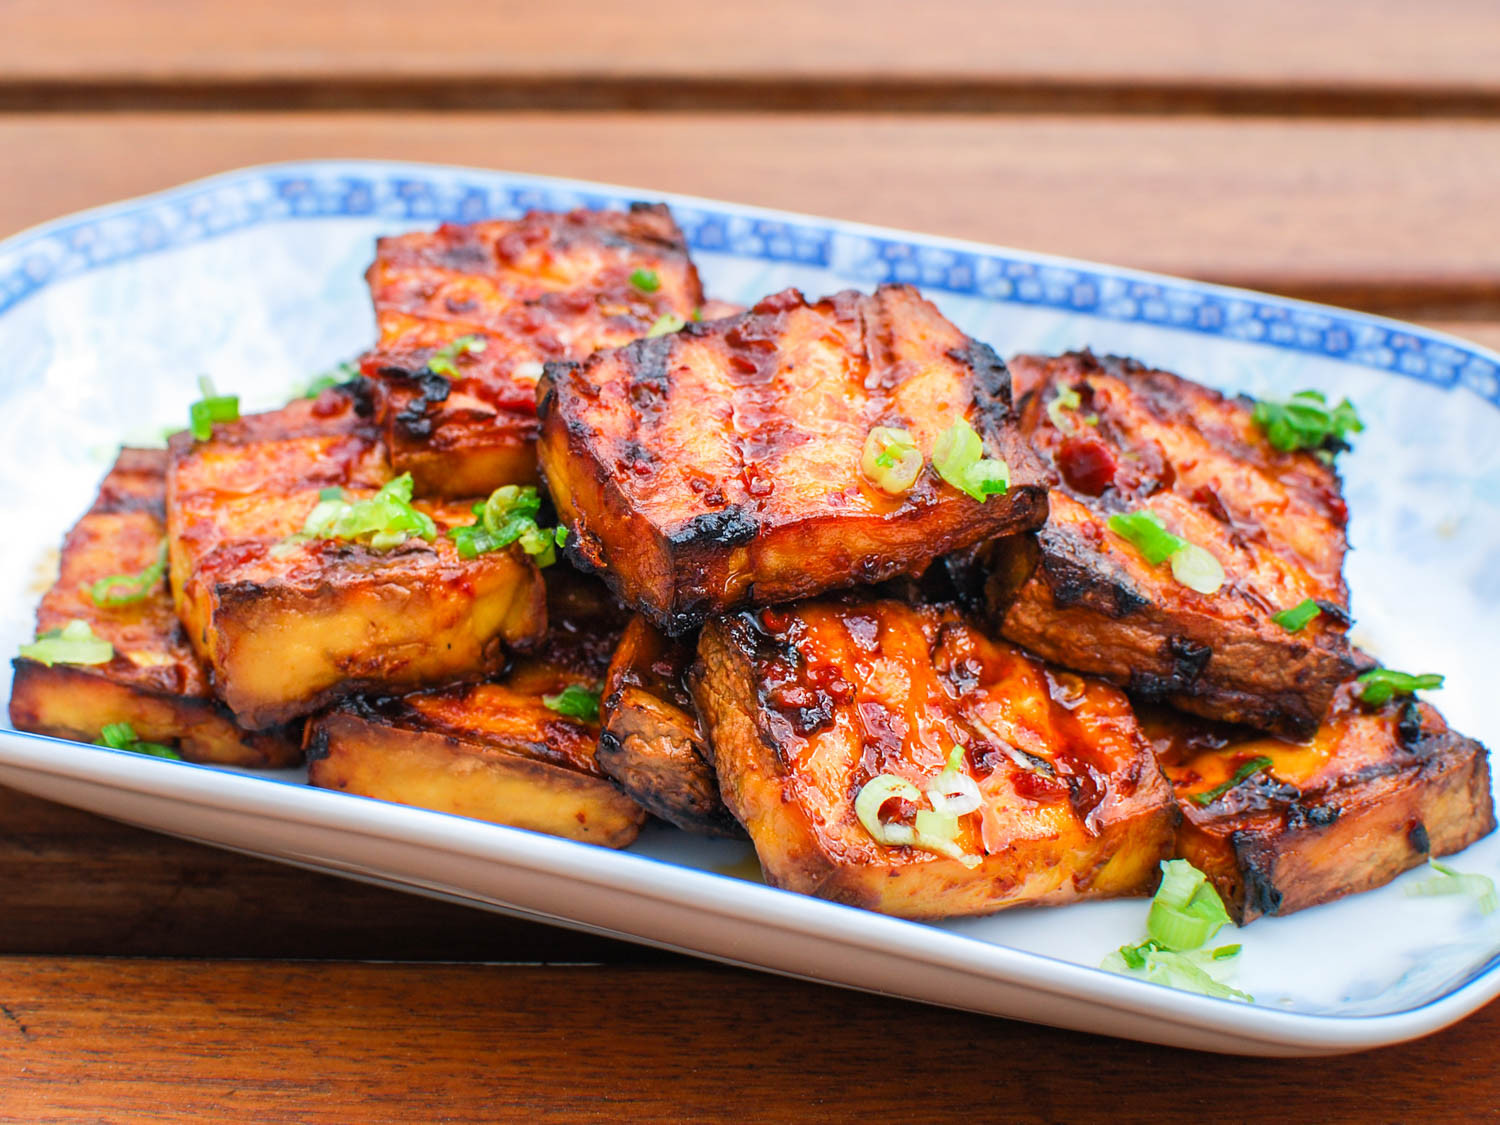 Grilled Tofu Recipes
 Cuisines Collide in This Grilled Tofu With Chipotle Miso